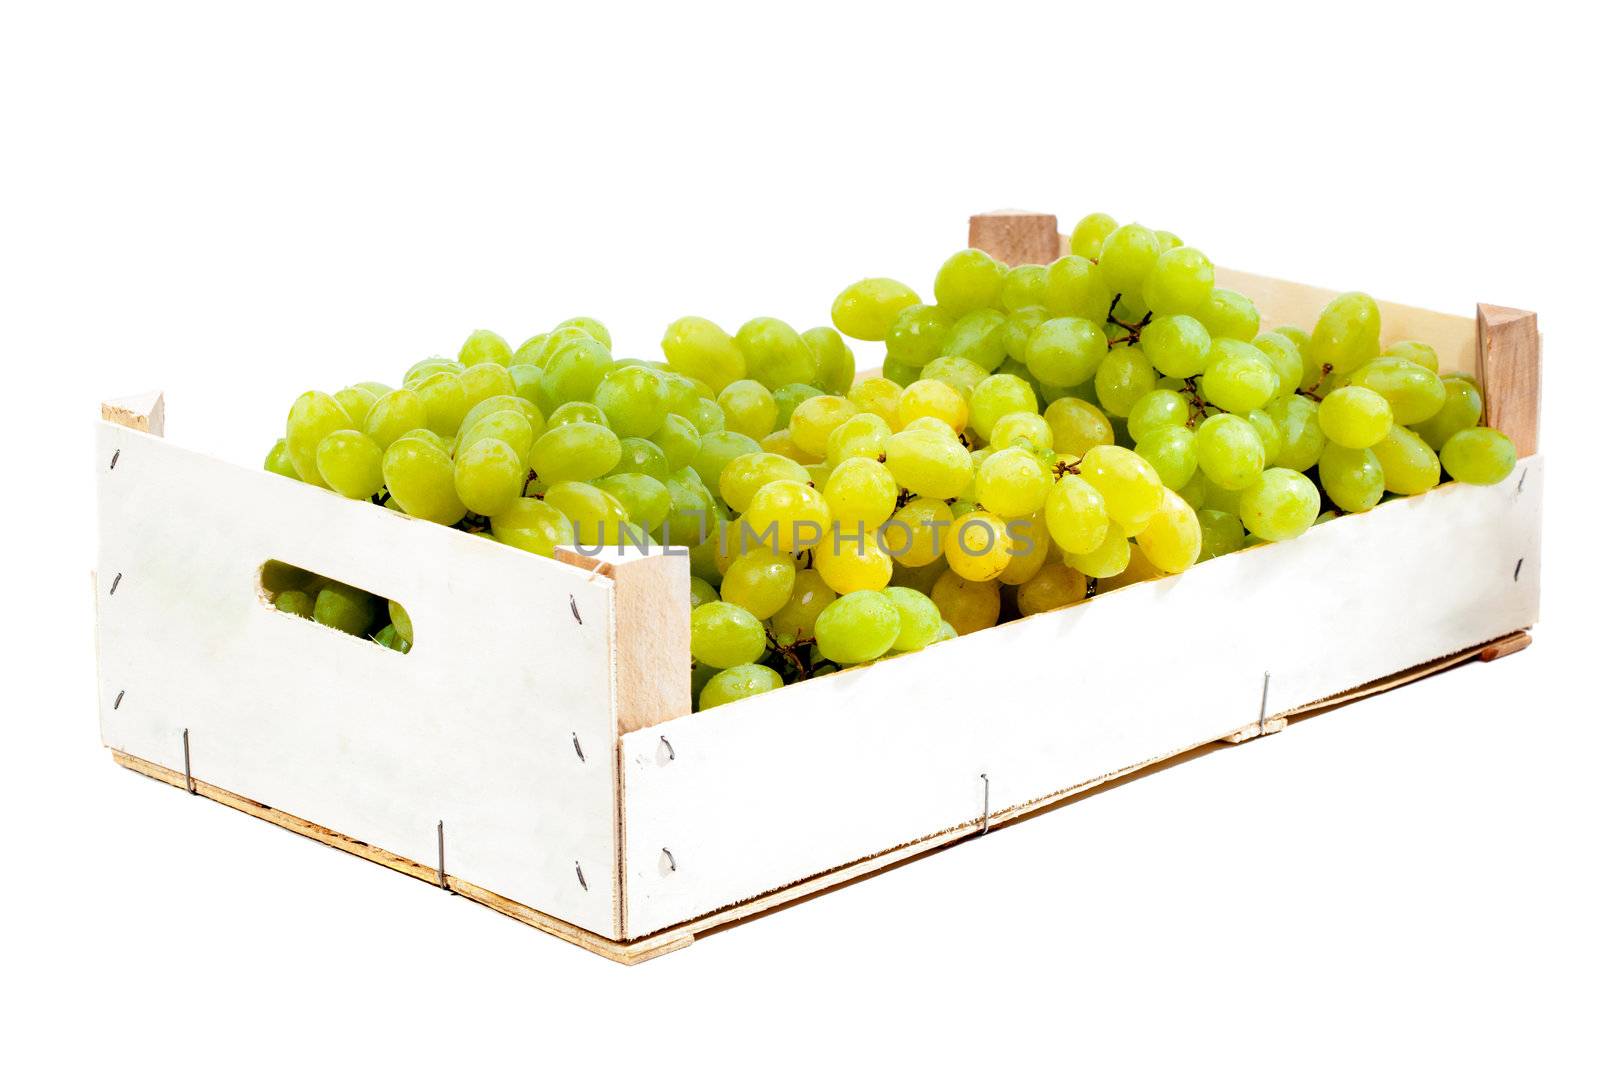 Grapes in a wooden box by kokimk